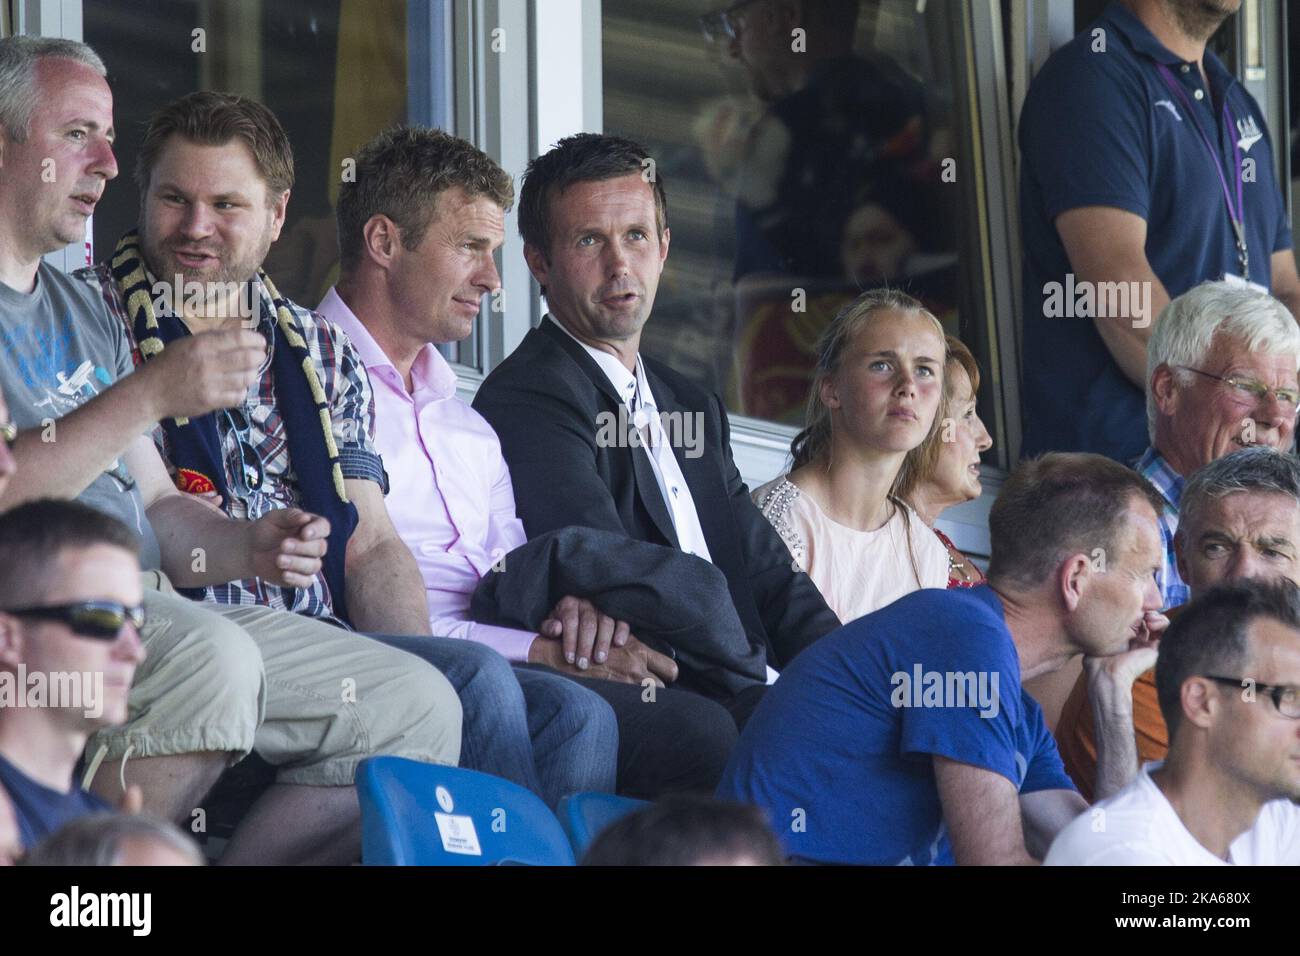 Incoming manager of Scottish Premiership club Celtic Ronny Deila (C) and Director of Football in Stromsgodset, Jostein Flo (3rd from left) on the stand during the match between Deila`s former club Stromsgodset and Haugesund in the Norwegian top football league in Drammen, 9 June 2014. Photo by Audun Braastad, NTB scanpix Stock Photo